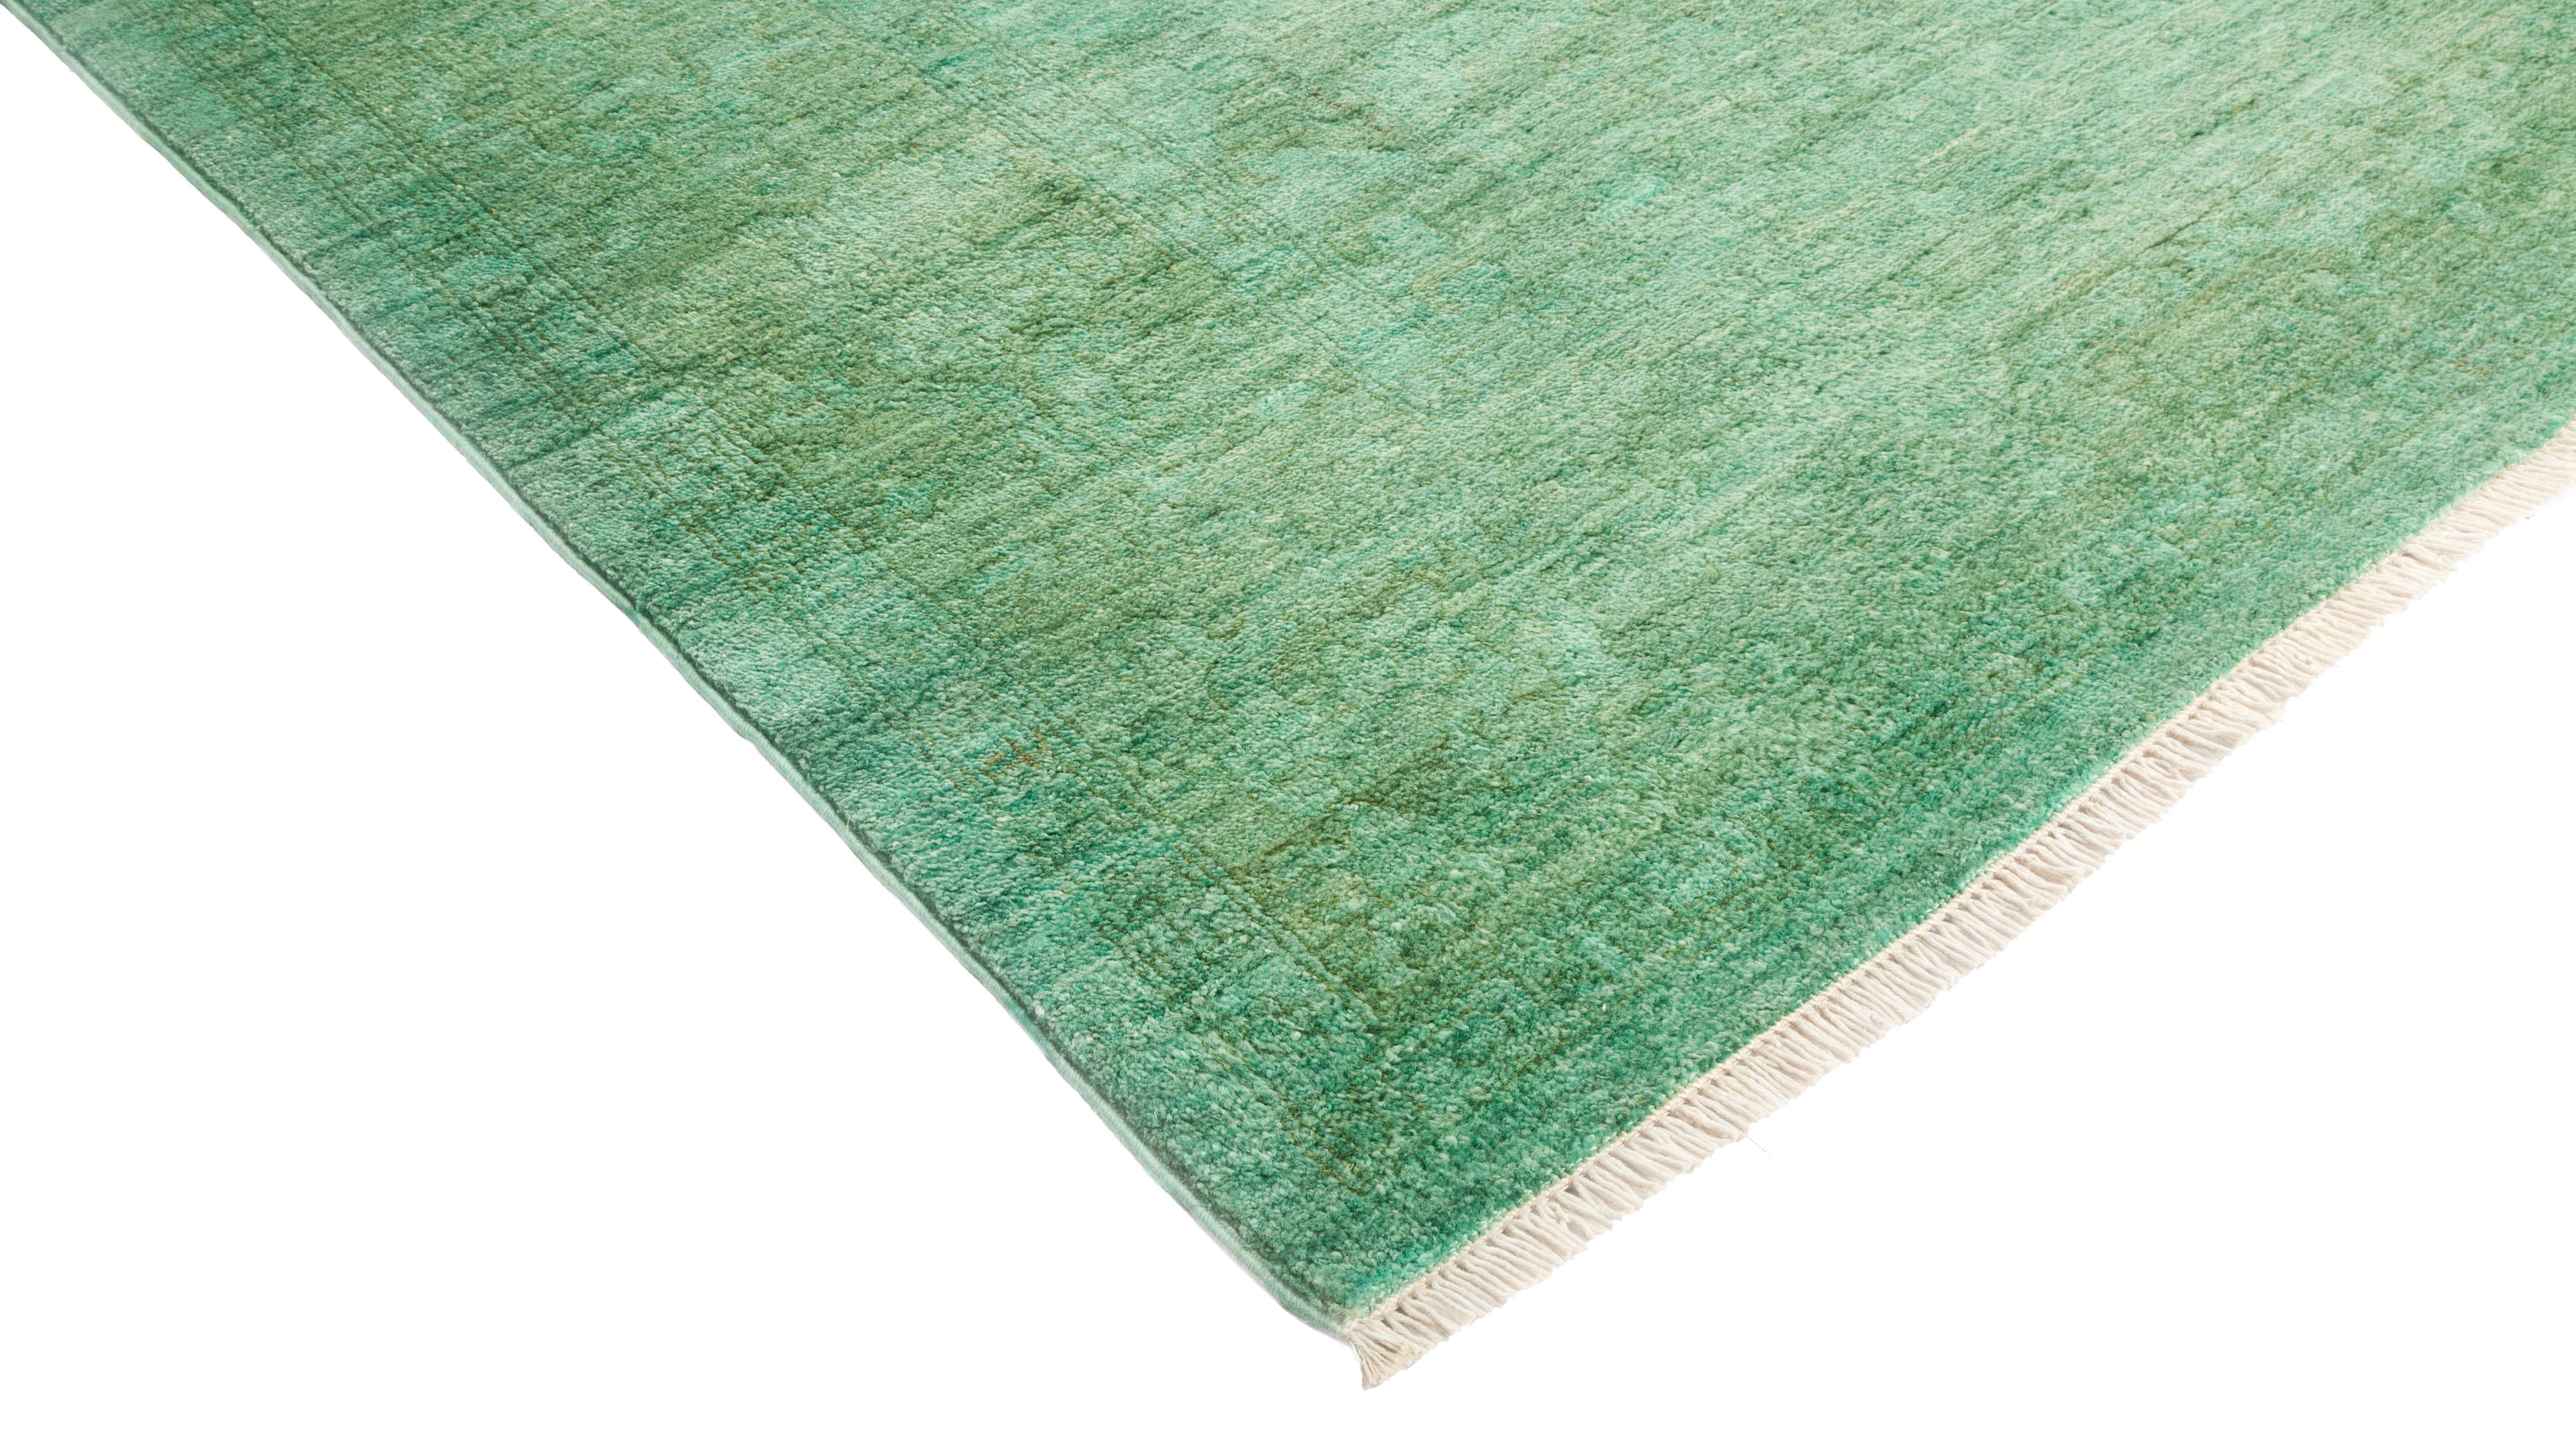 Color: Green, made in: Pakistan. 100% wool. The colorful collection epitomizes Classic with a twist: traditional patterns overdyed in brilliant color. Each hand knotted rug is washed in a 100%-natural botanical dye that reveals hidden nuances in the